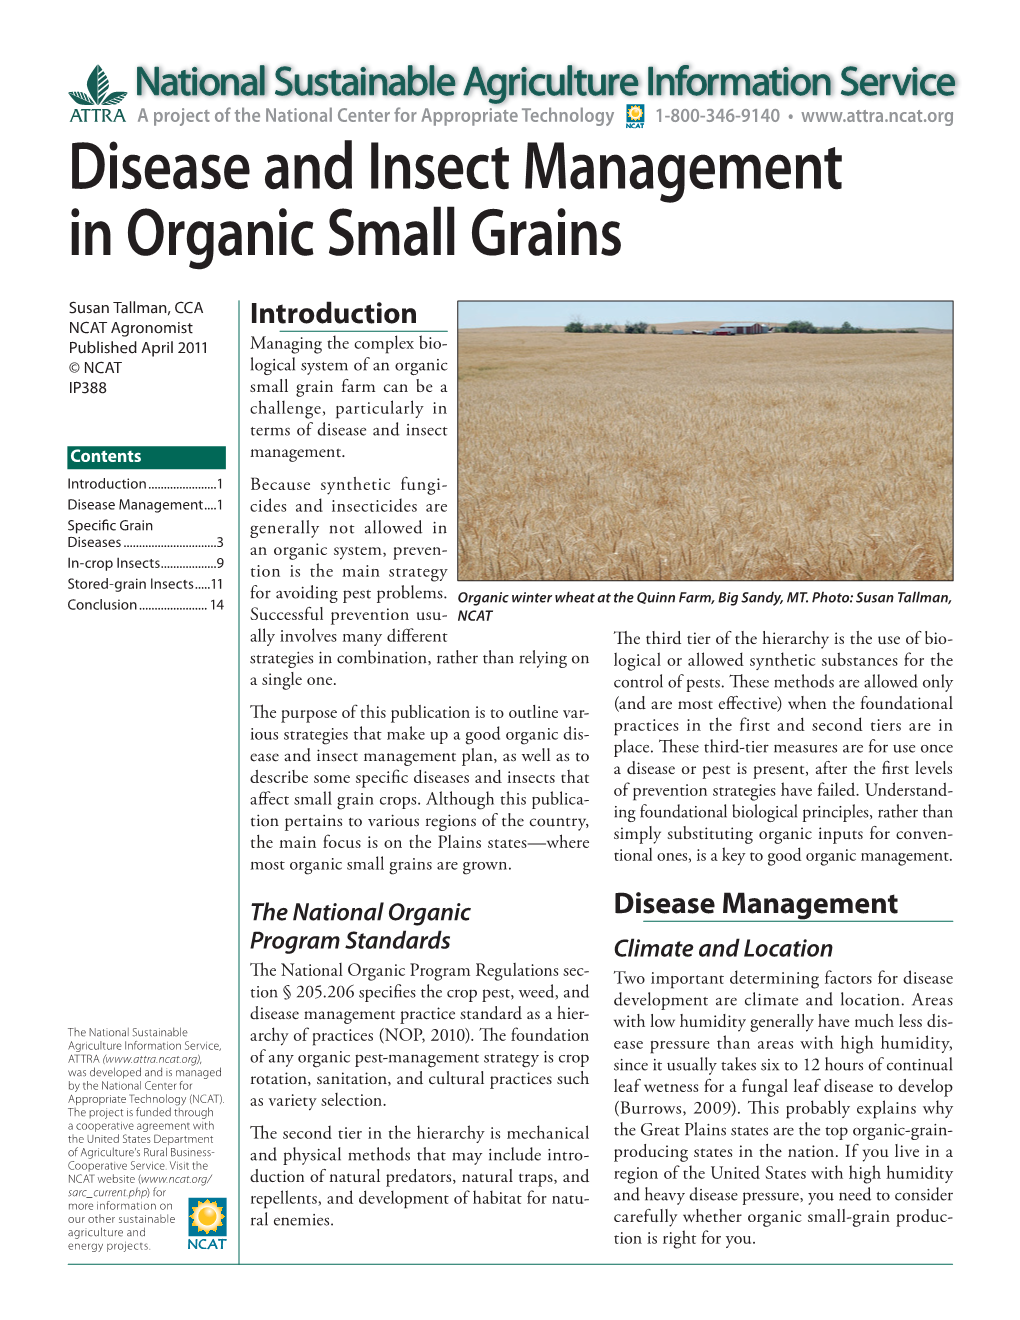 Disease and Insect Management in Organic Small Grains